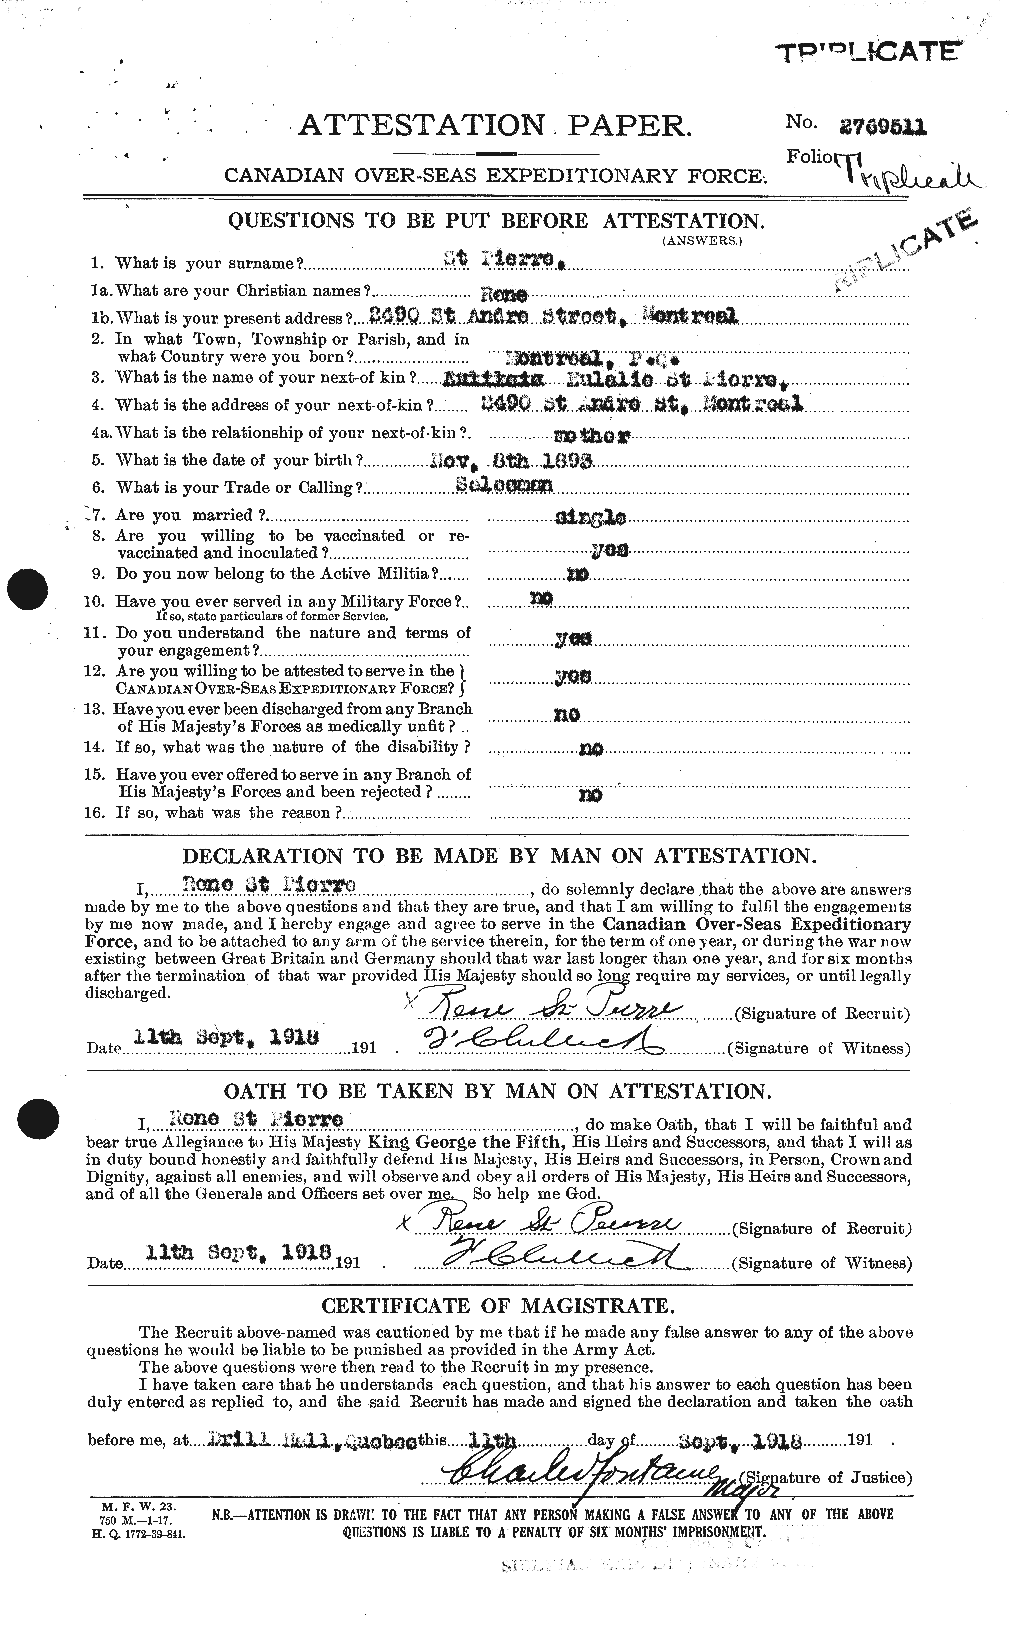 Personnel Records of the First World War - CEF 077566a